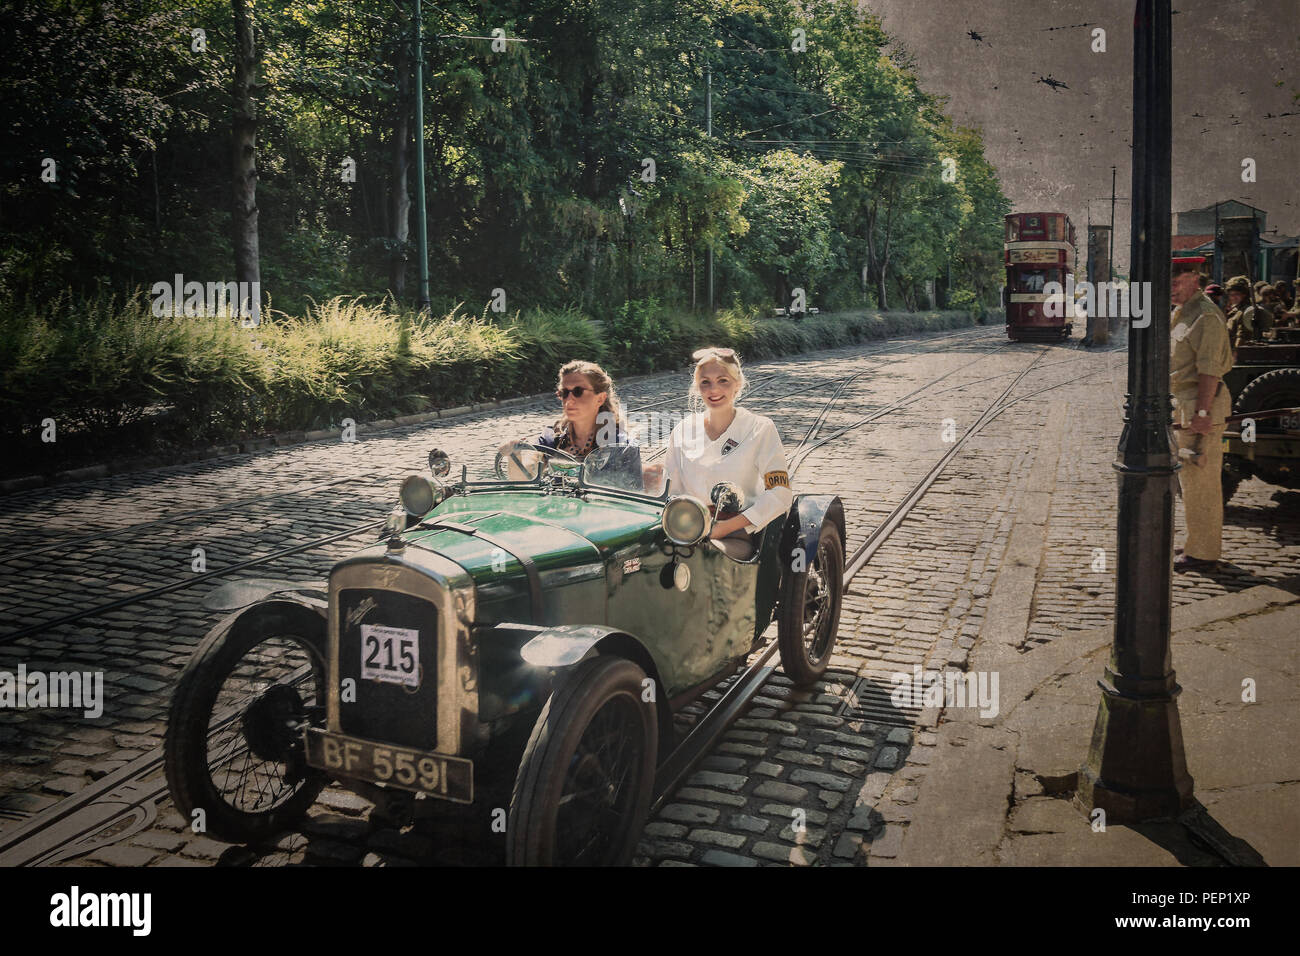 Crich Tramway Village, Derbys, 1940s event. Vintage street scene & the girls are out cruising to impress & enjoying their vintage Austin motor car! Stock Photo